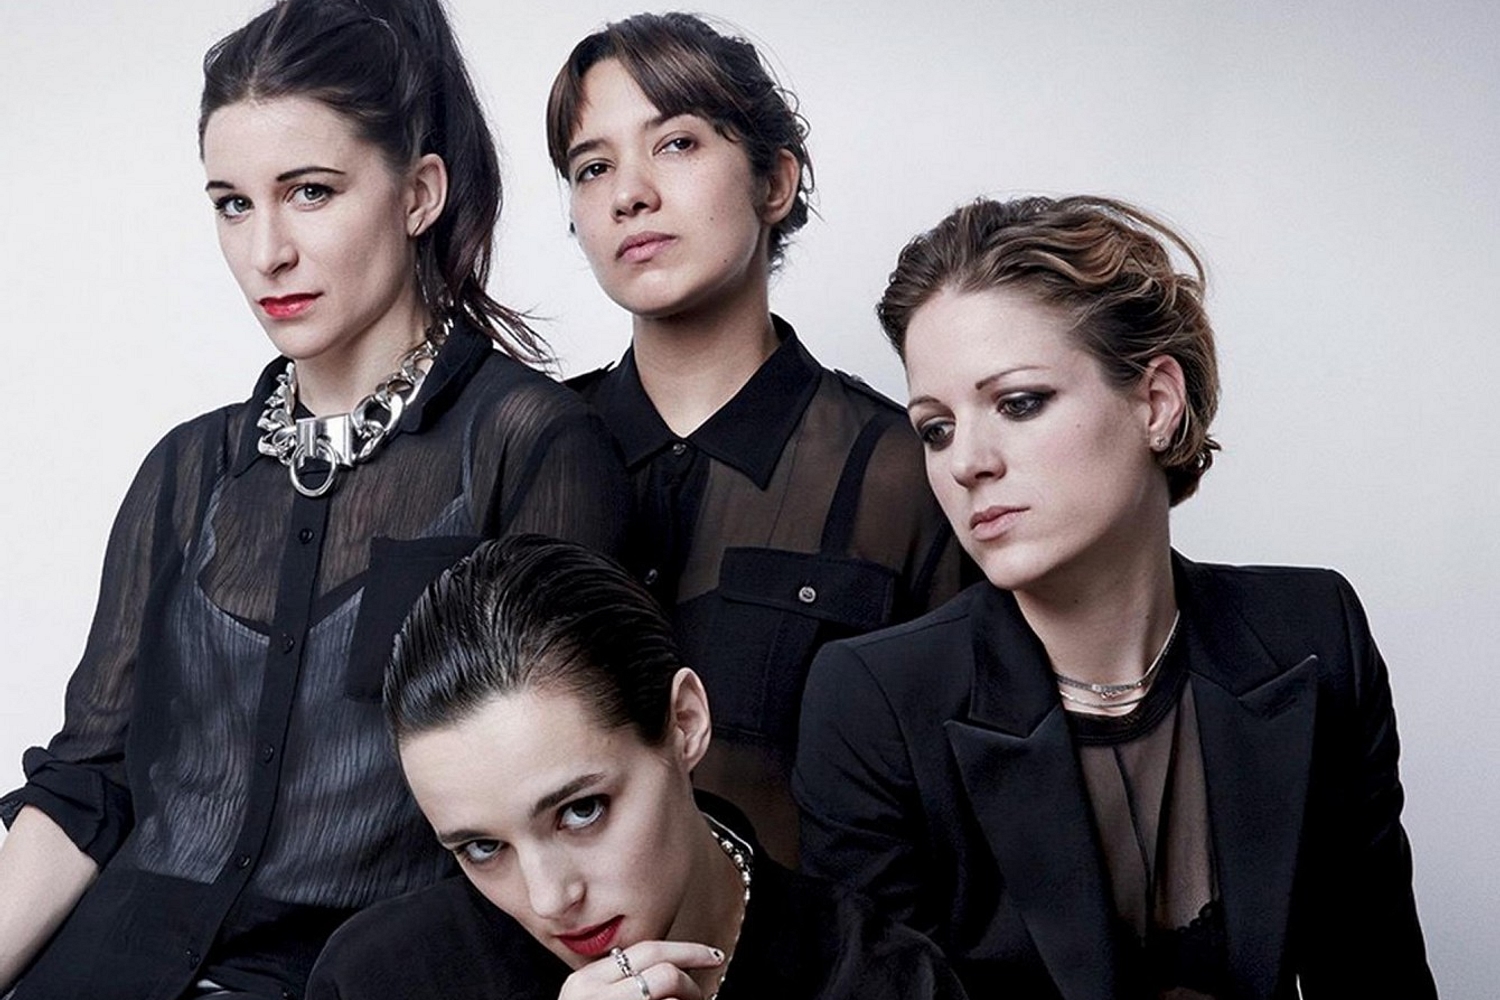 Savages: "We wanted to push our ideas as far as they could go"